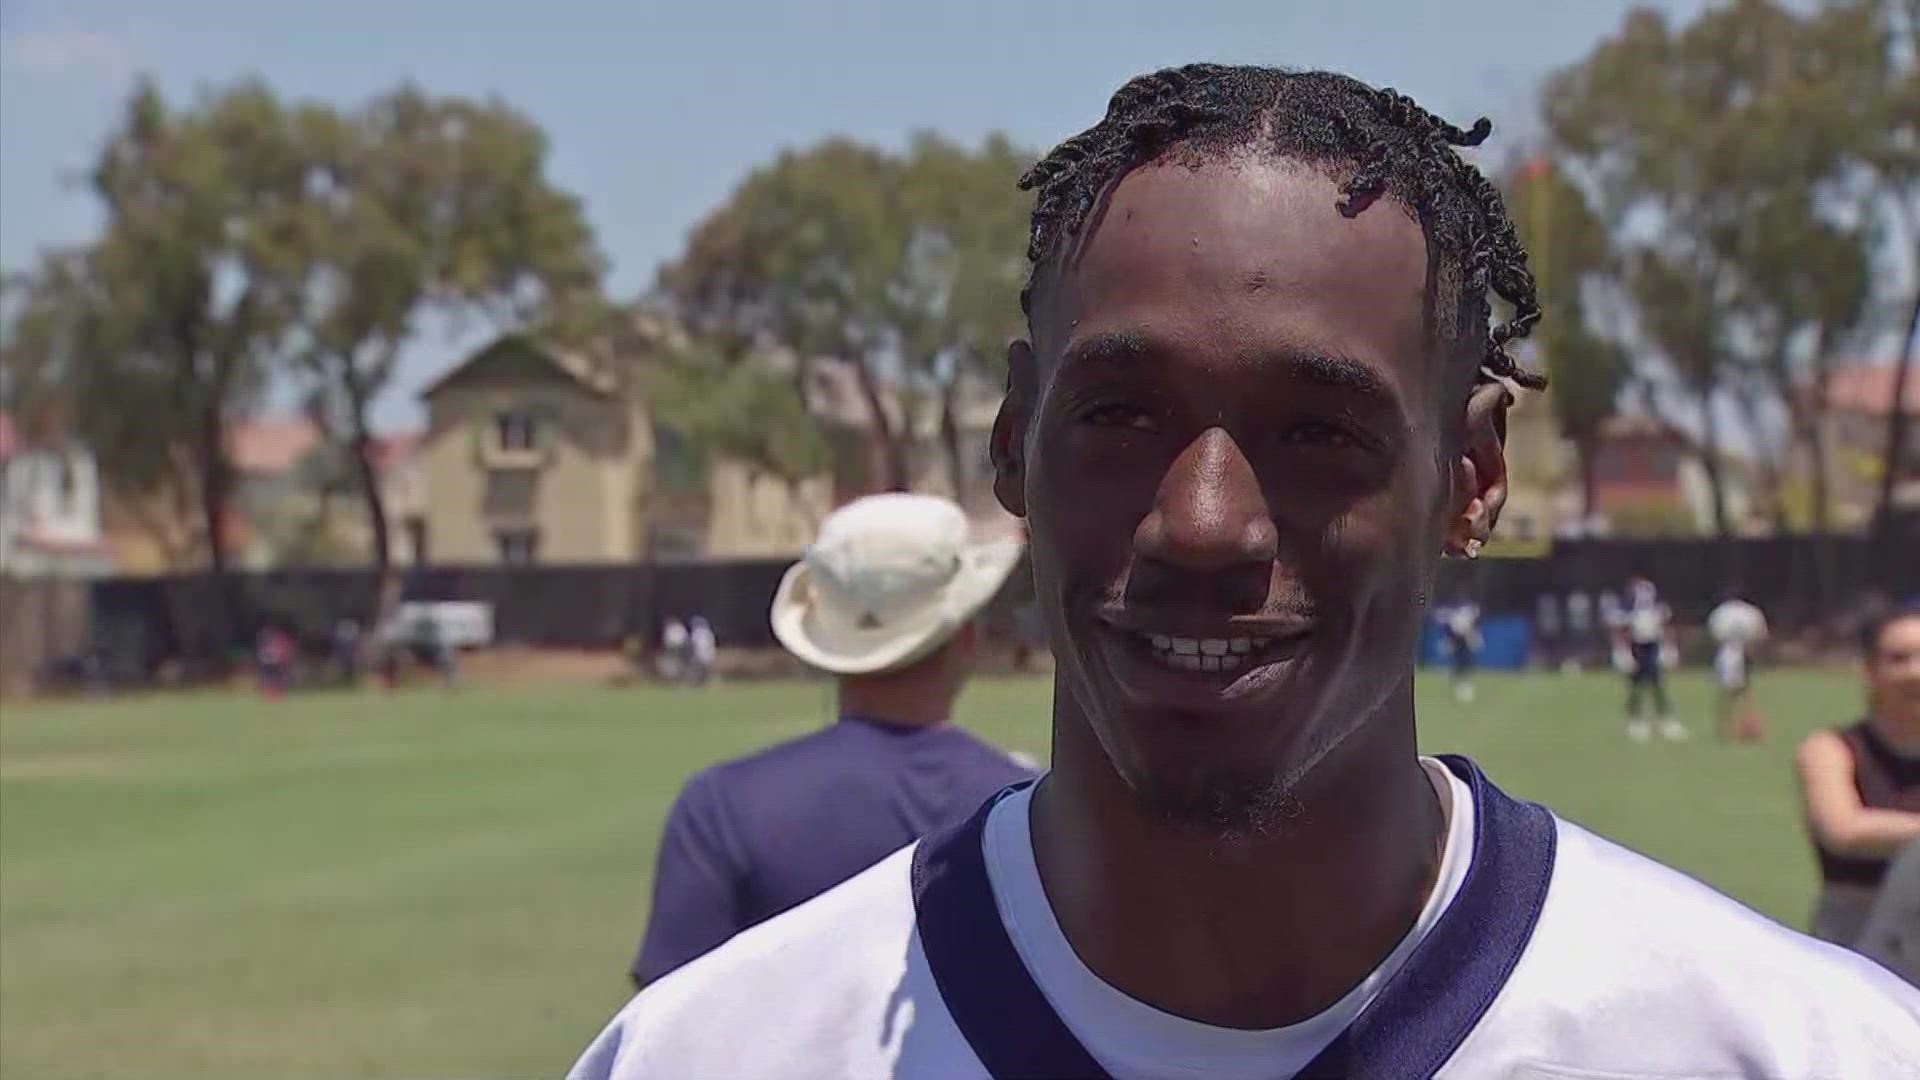 Vasher was turning heads at Cowboys training camp.